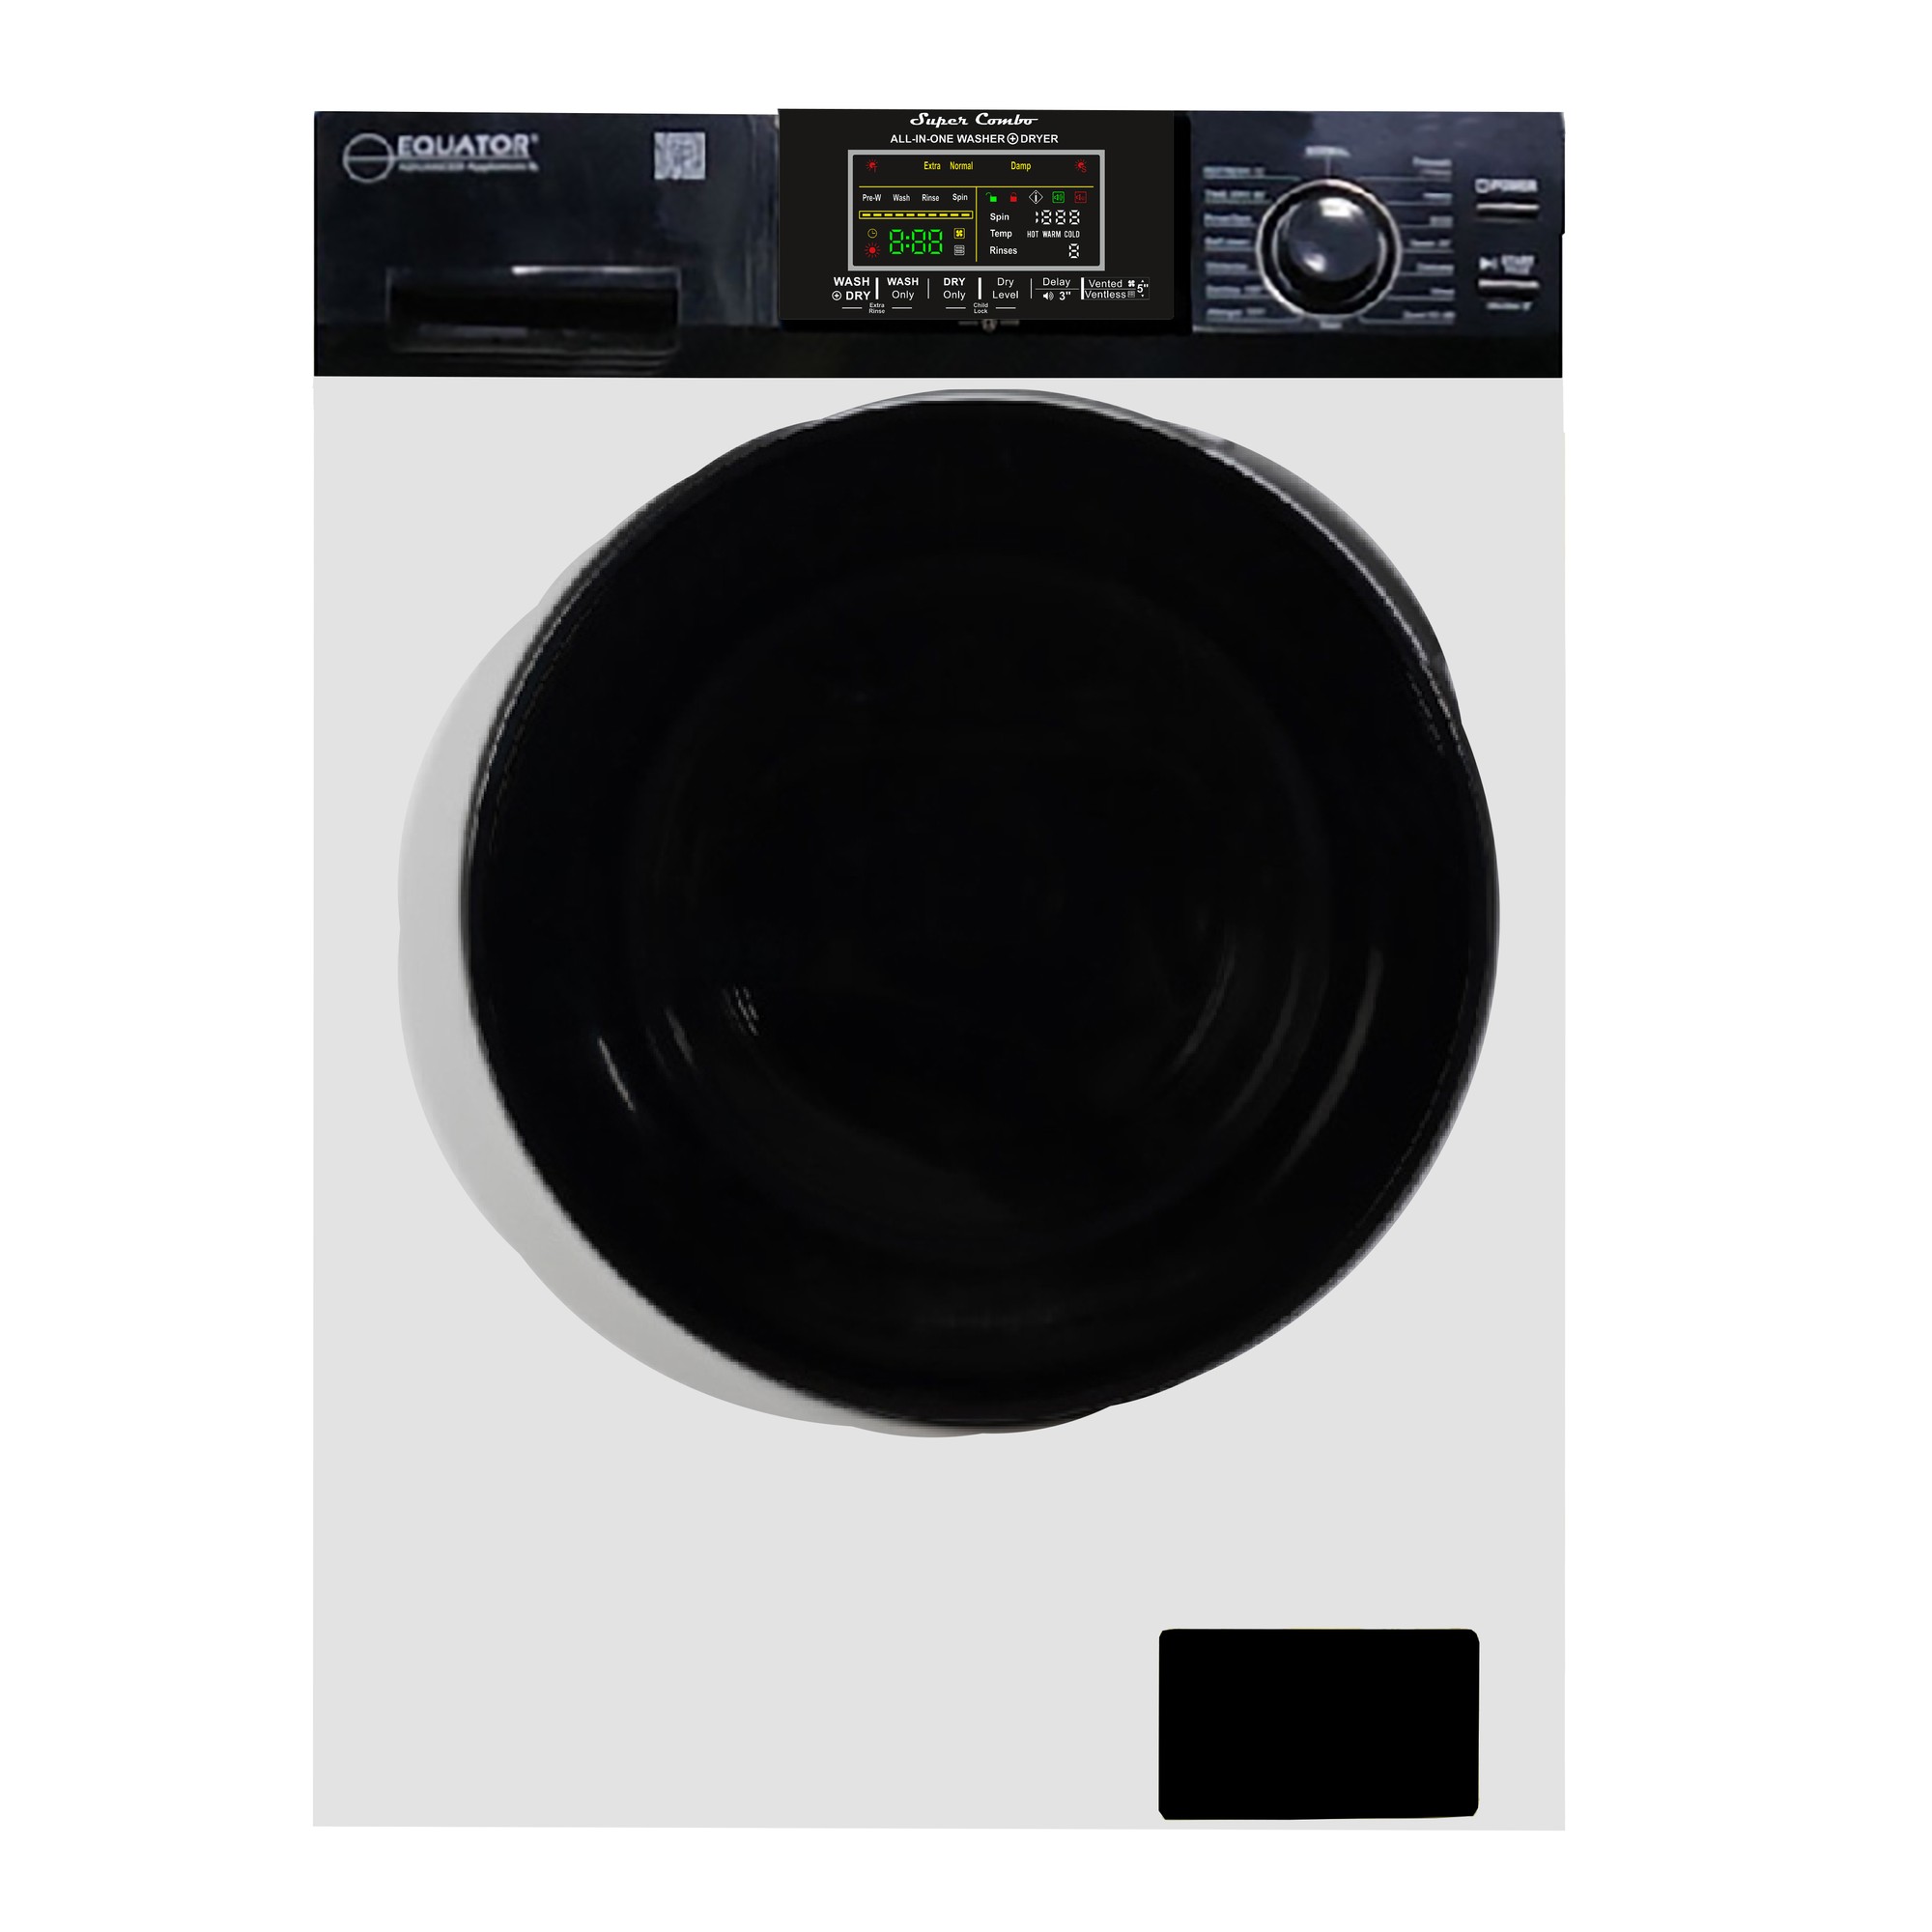 Equator Digital Compact 110V Vented/Ventless 18 lbs Combo Washer Dryer 1400 RPM (White/Black)